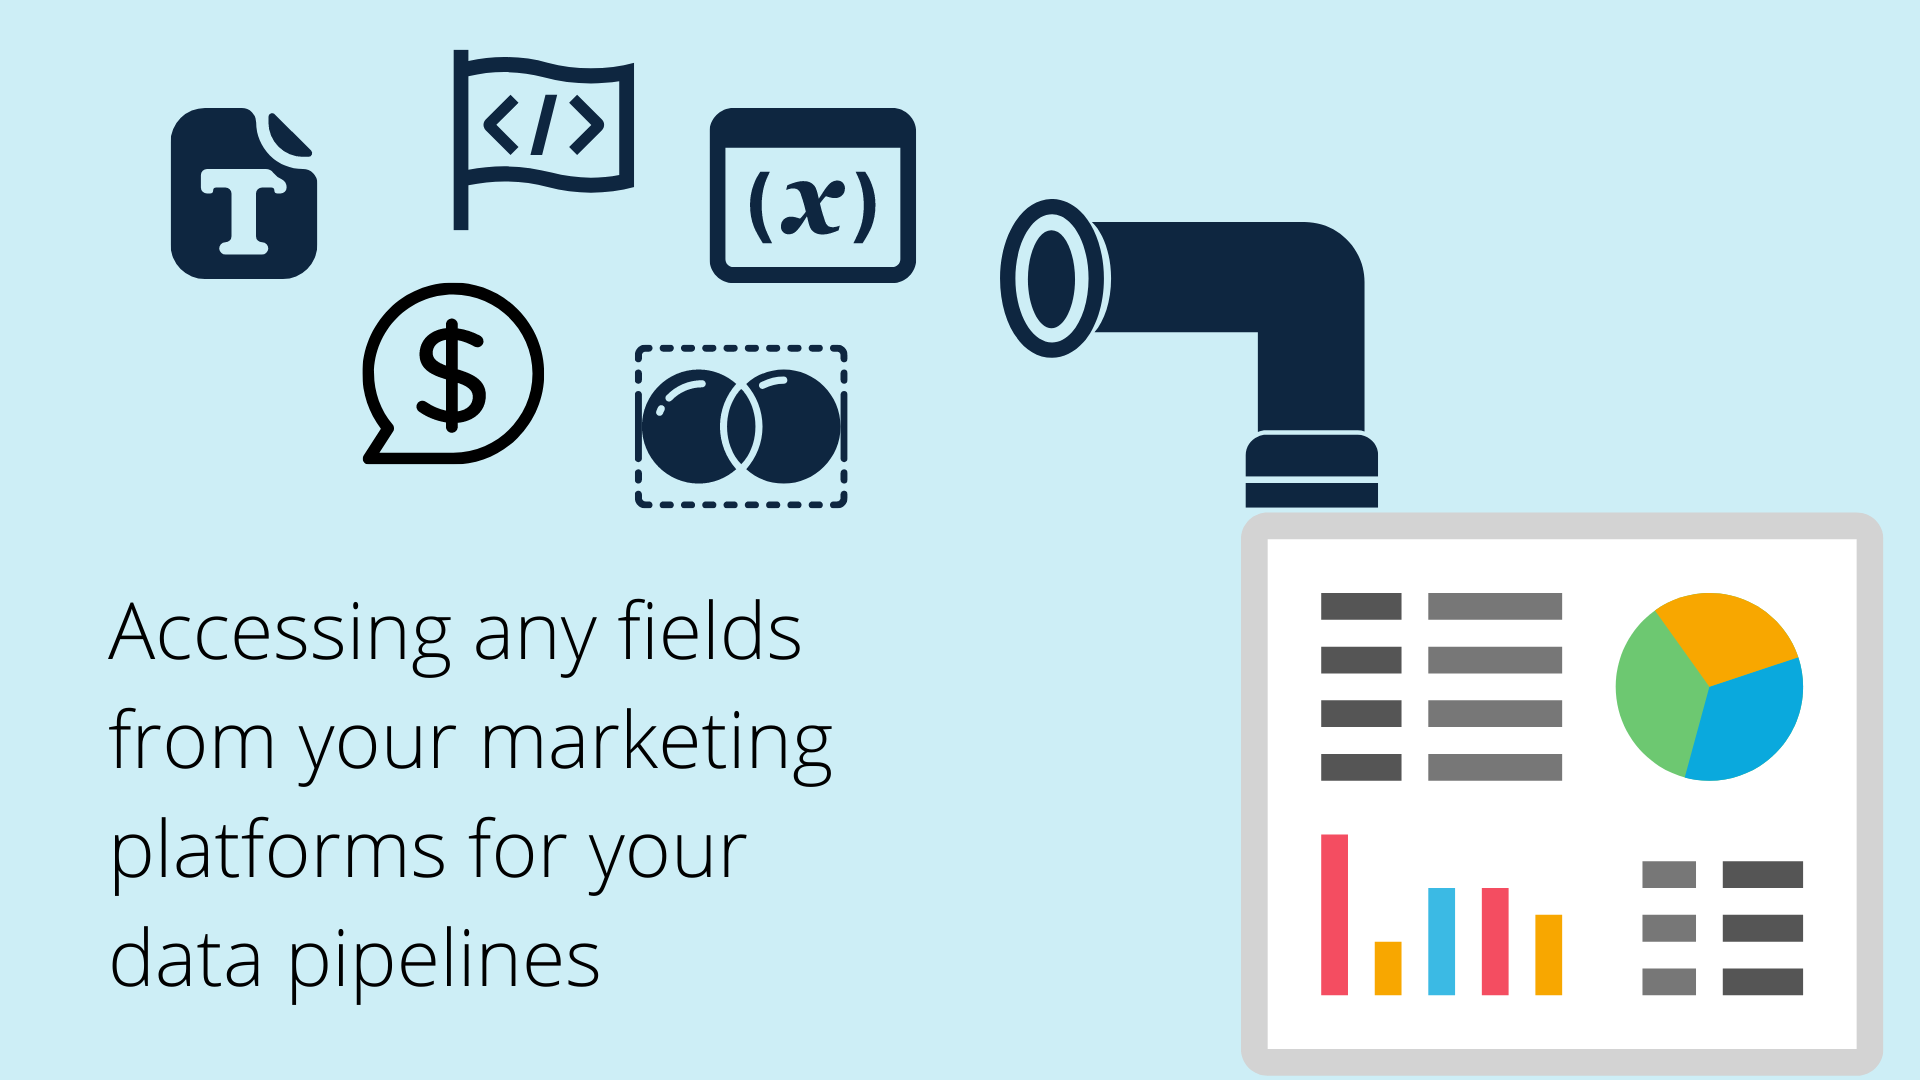 Accessing any fields from your marketing platforms for your data pipelines